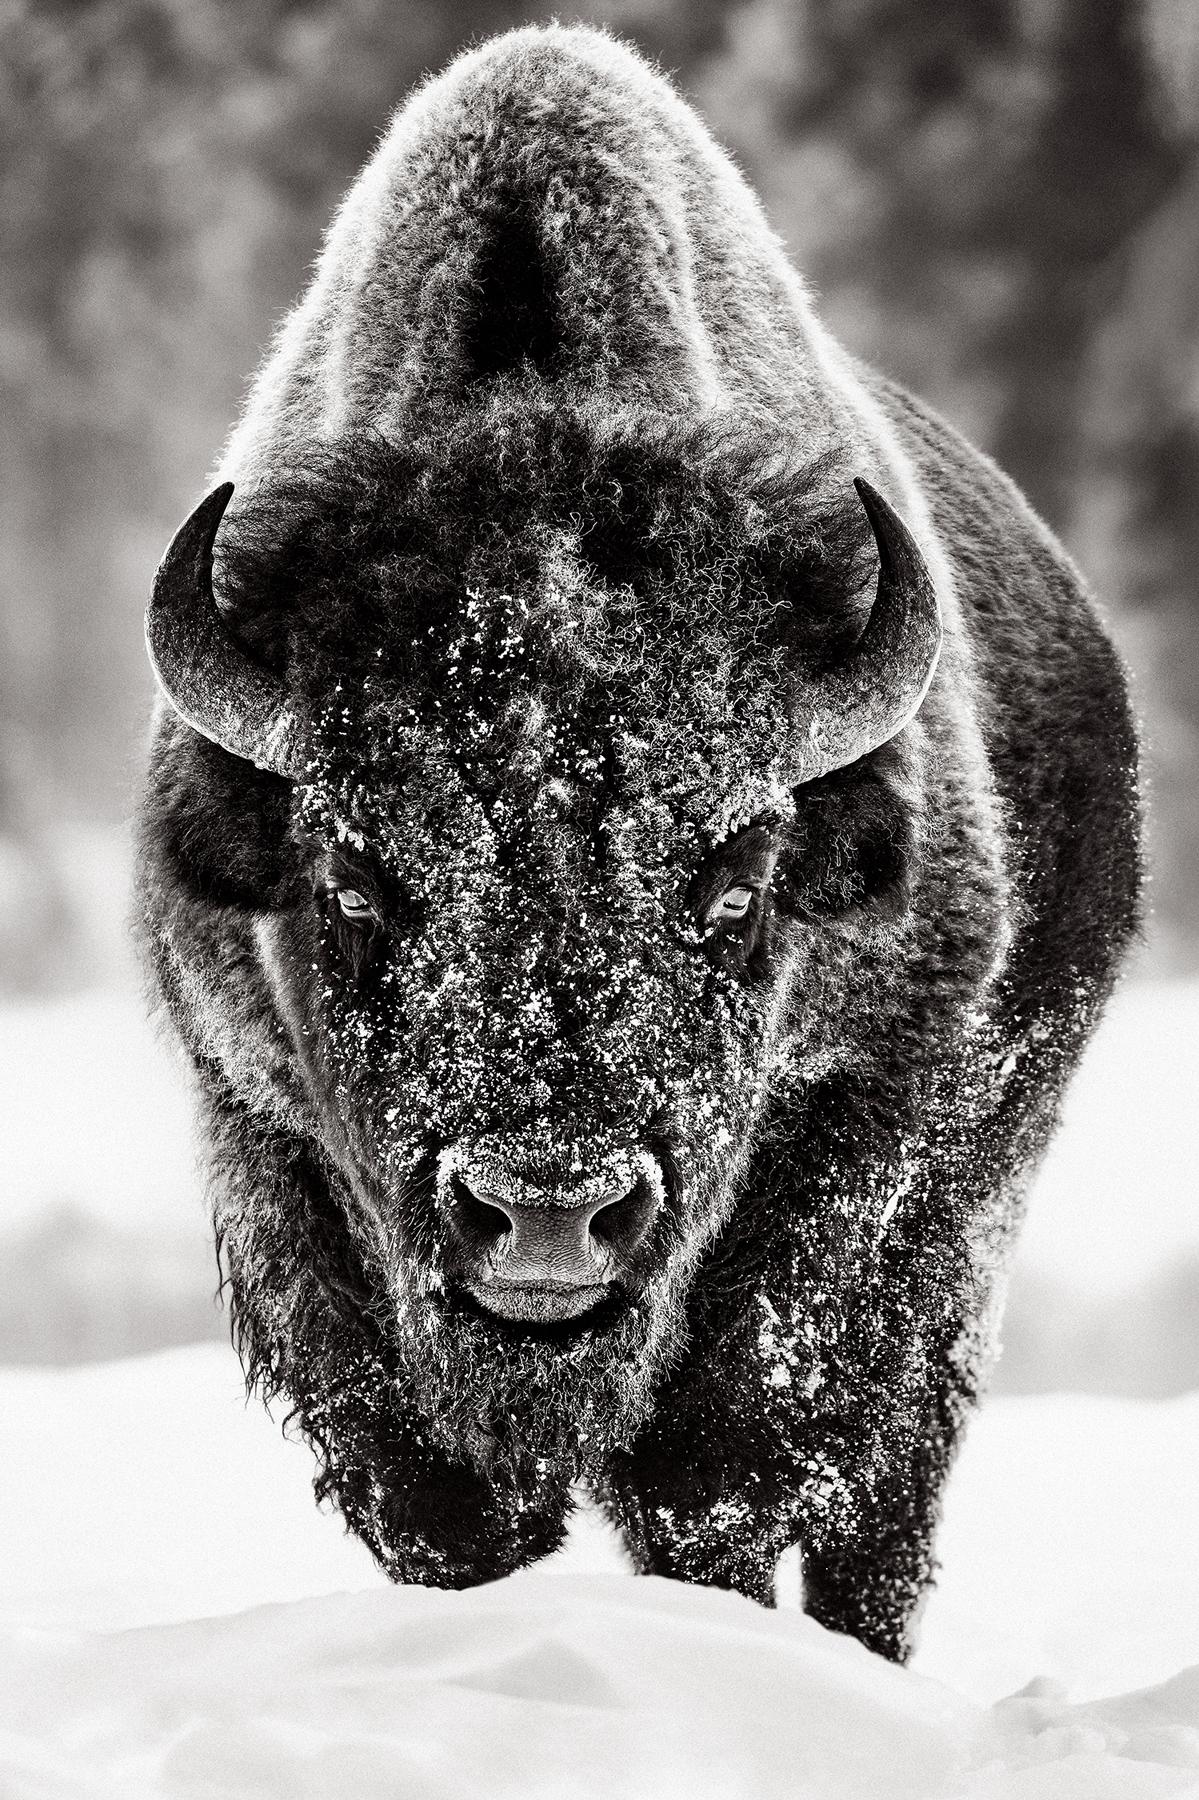 Drew Doggett Black and White Photograph - Epic, close up portrait of a single American bison in Yellowstone National Park